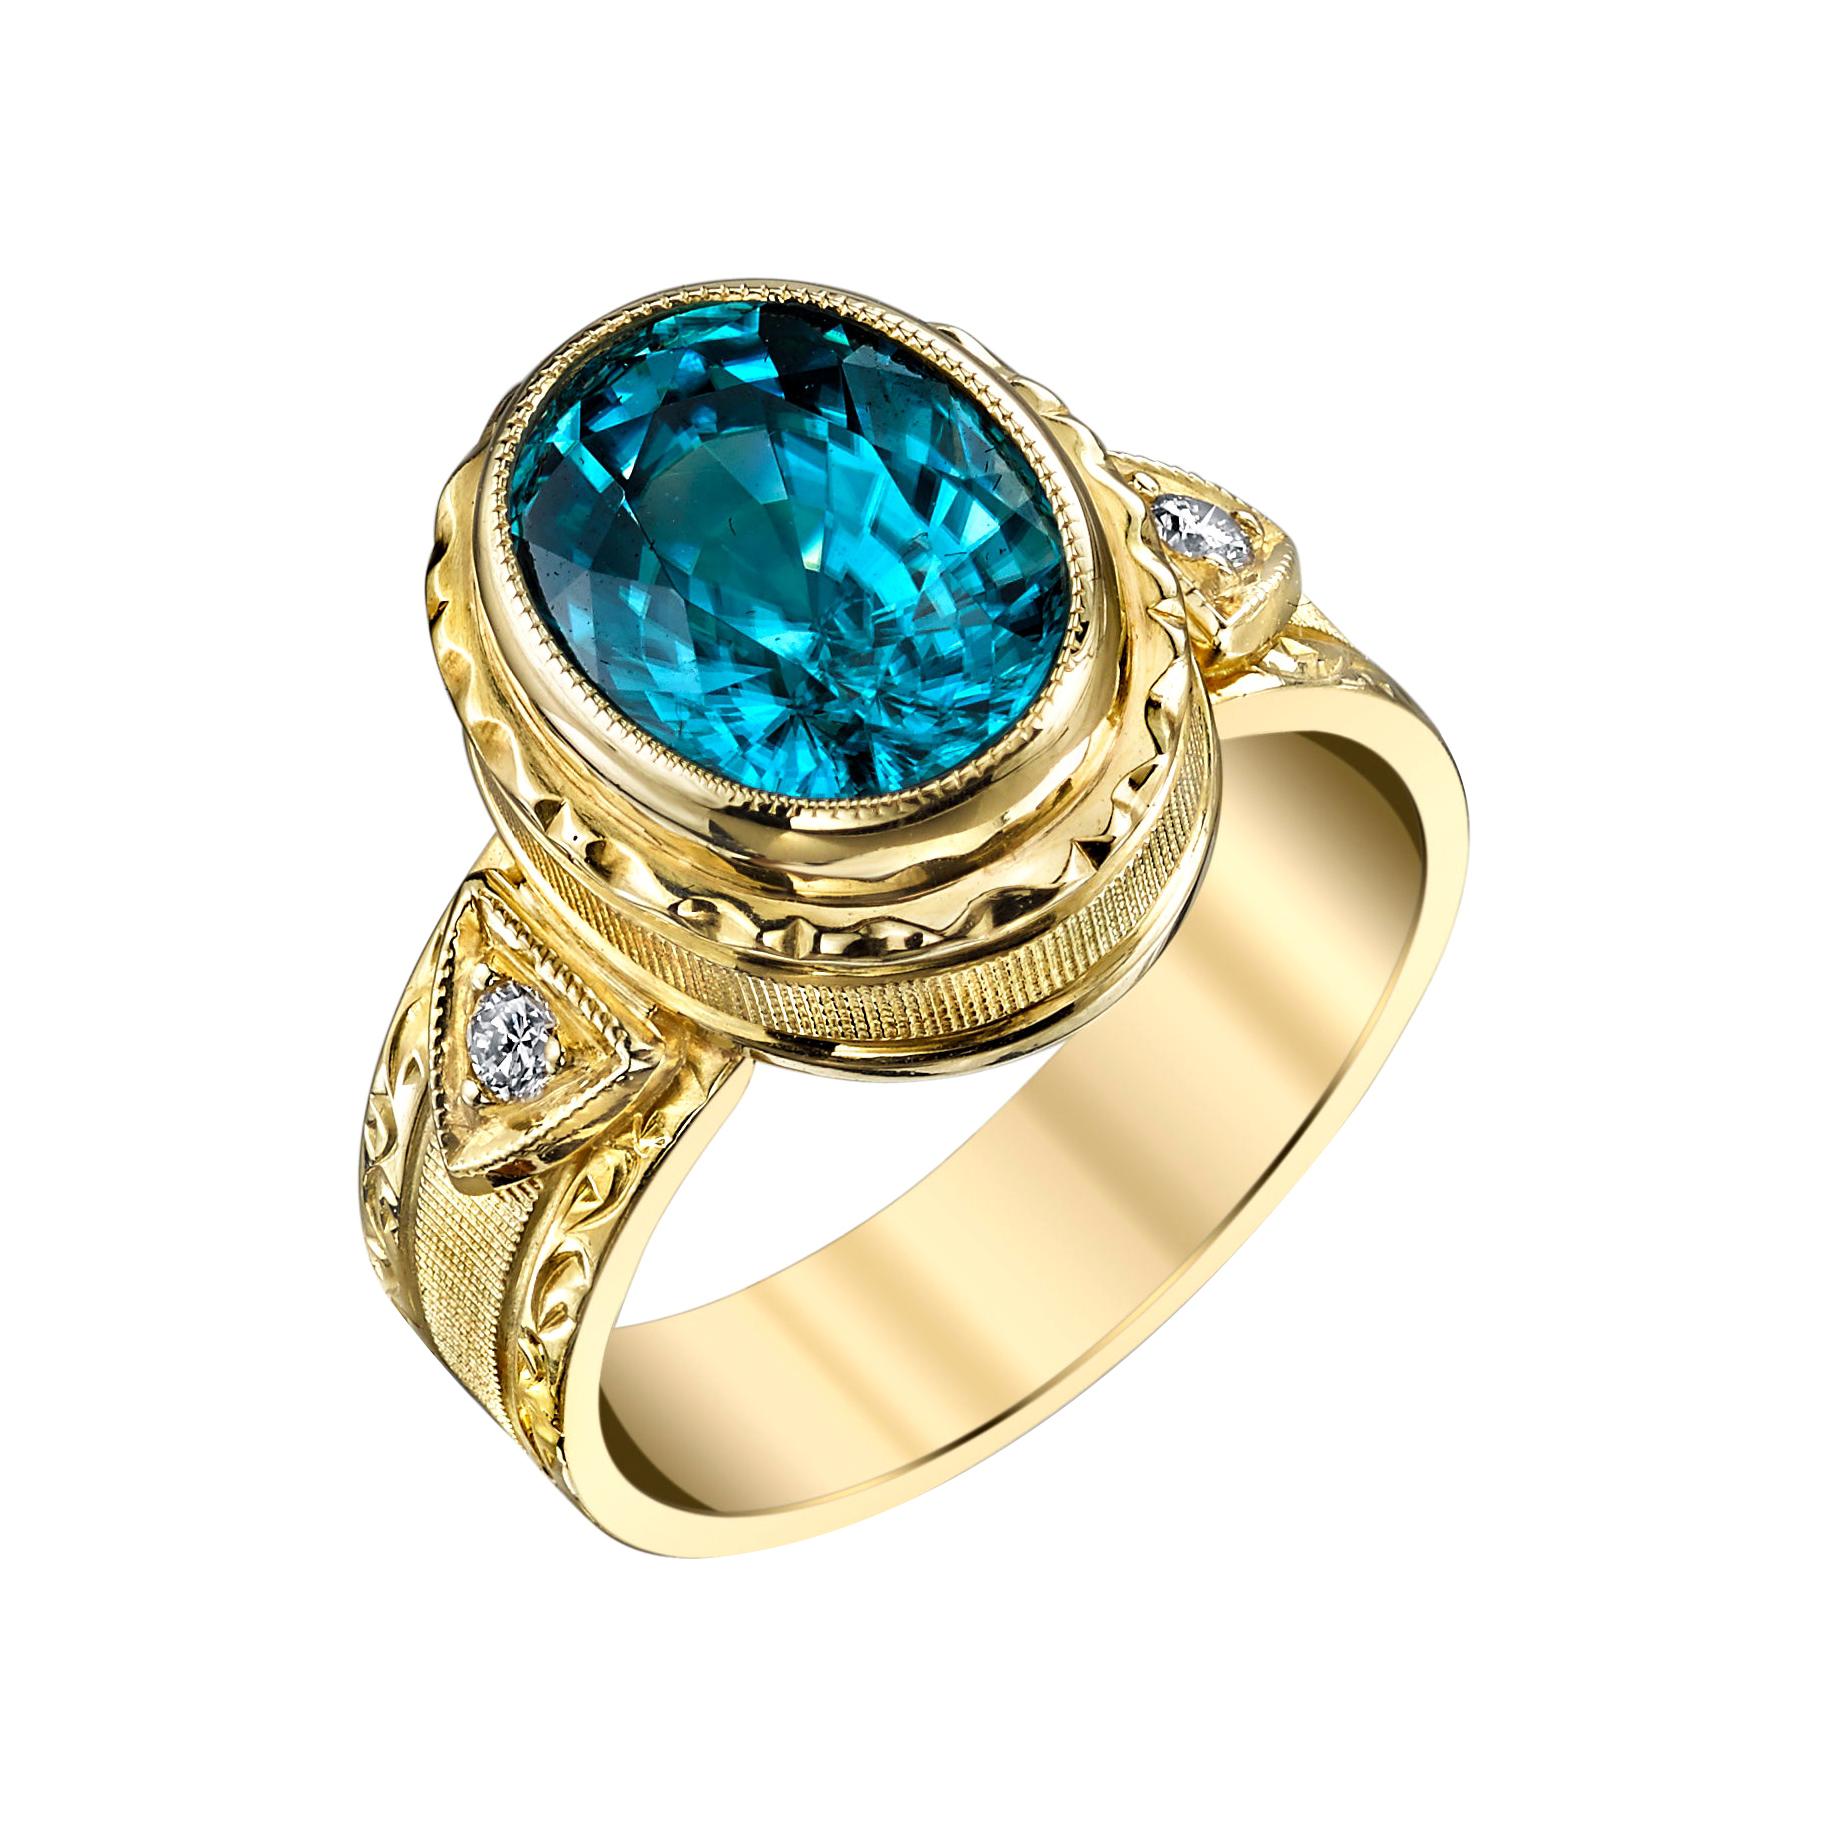 4.72 Carat Blue Zircon and Diamond Hand-Engraved Band Ring in 18k Yellow Gold  